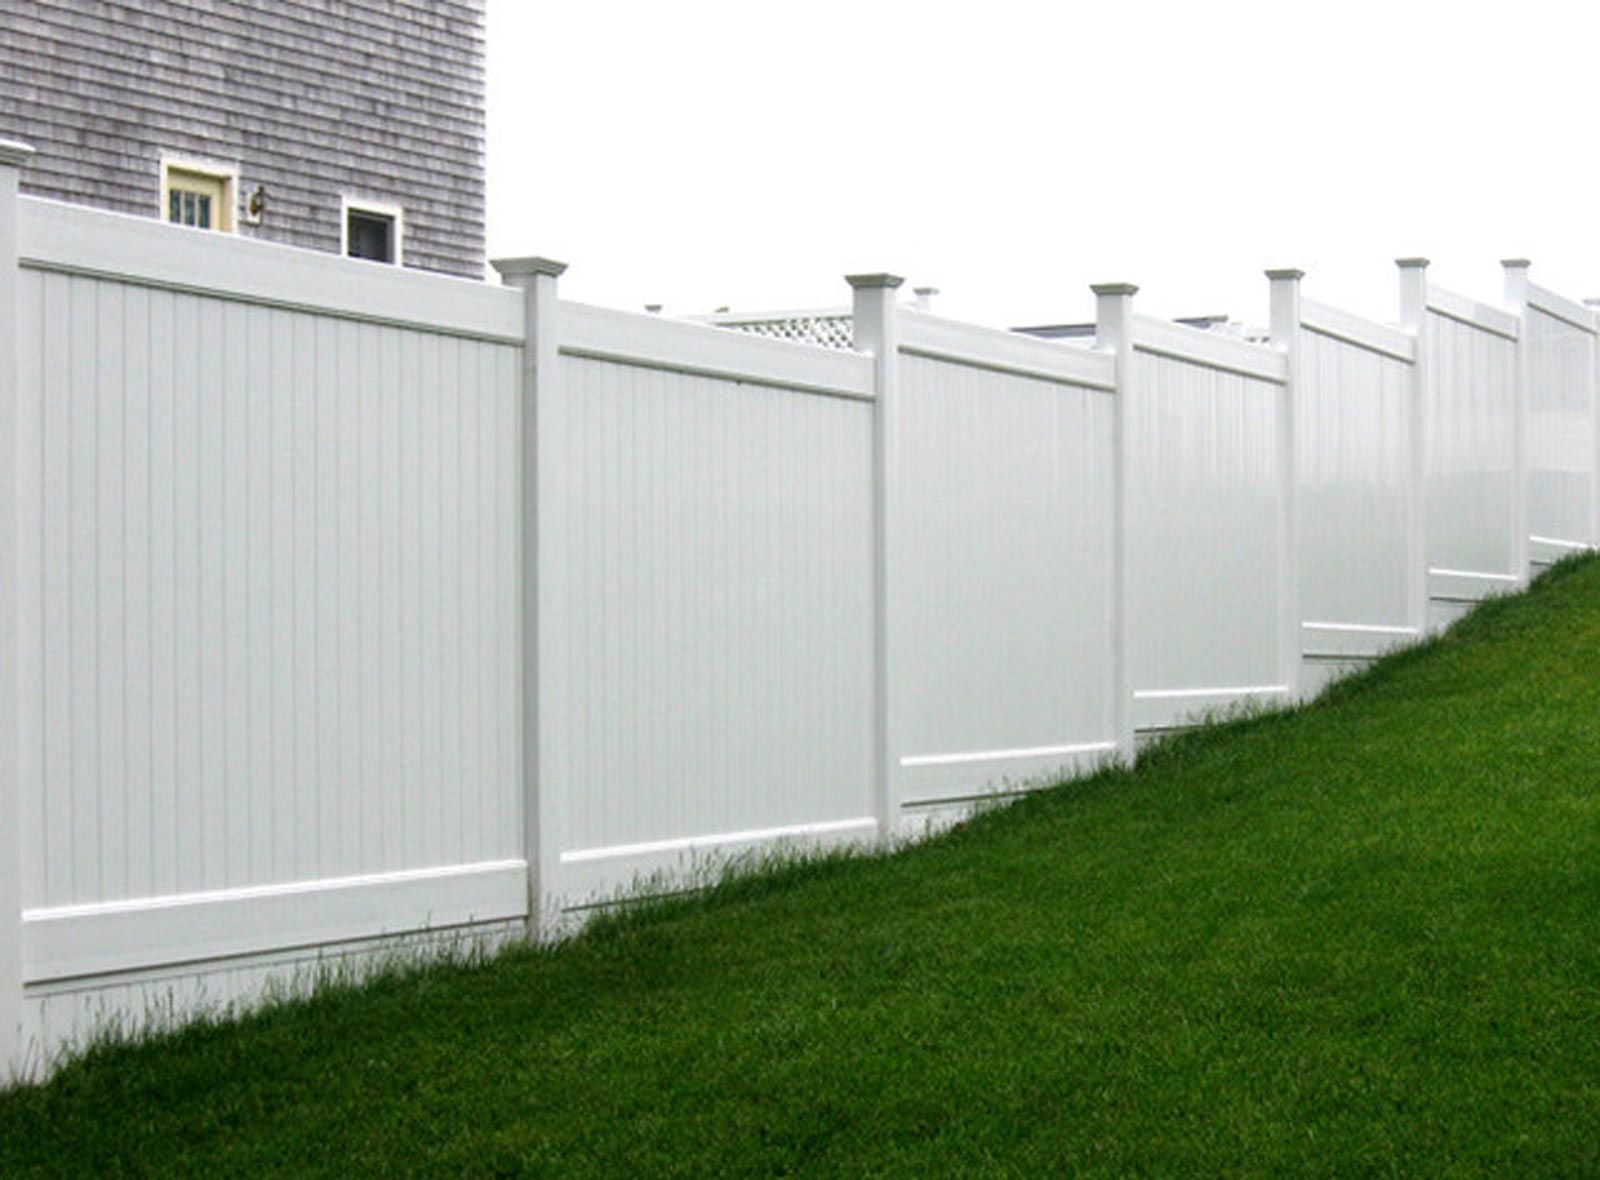 How To Install A Privacy Fence On A Slope Our Aluminum Fence Is